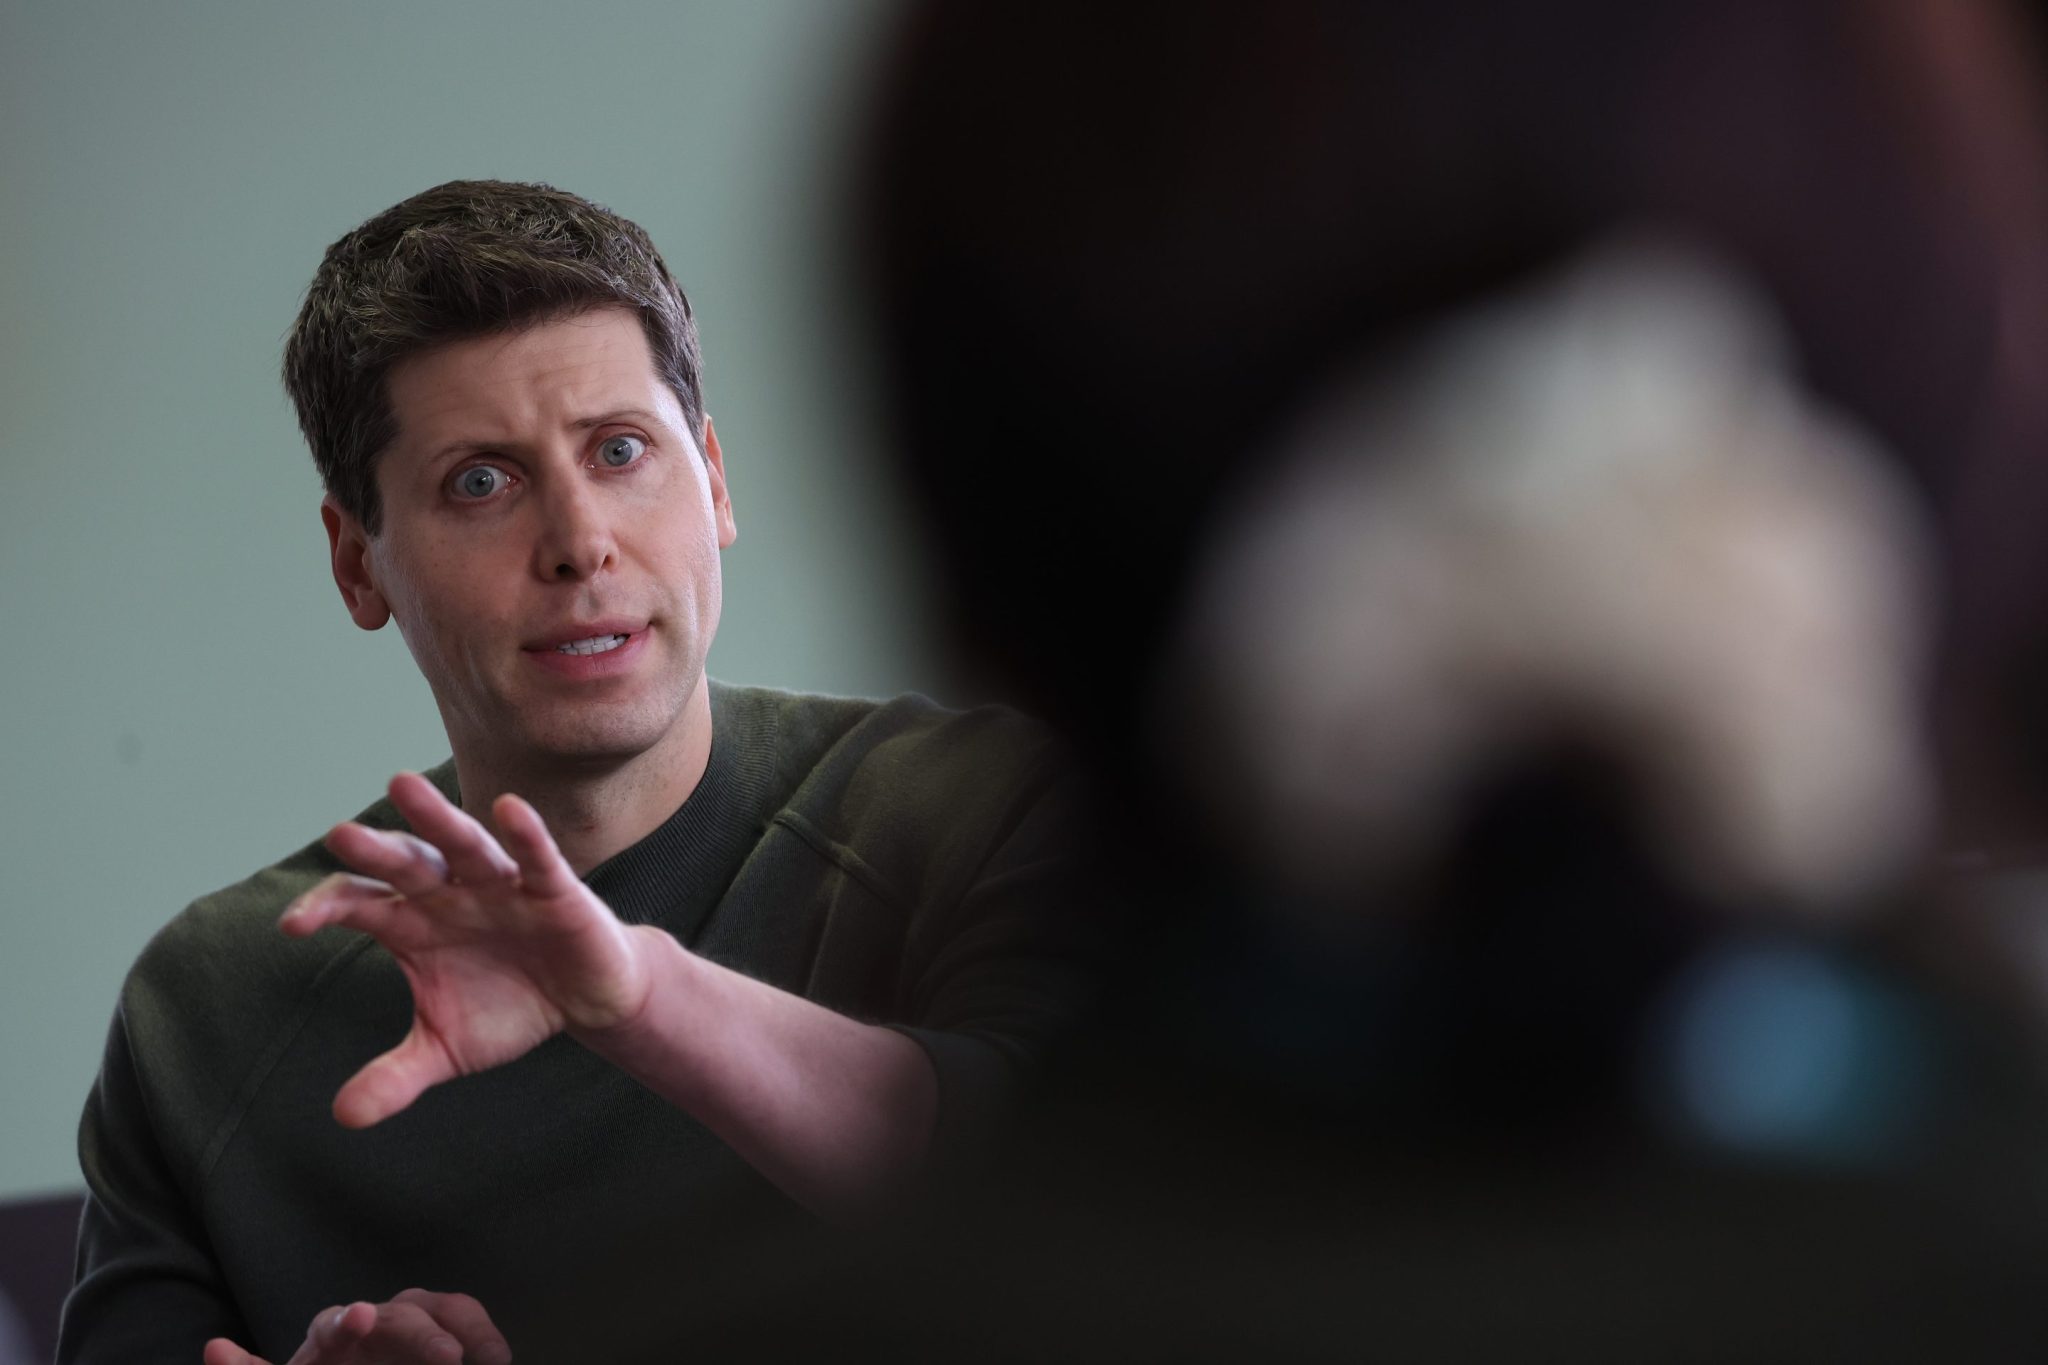 Silicon Valley leaders are calling Sam Altman’s firing the biggest tech scandal since Apple fired Steve Jobs—but the leading theory about the OpenAI drama tells a different story